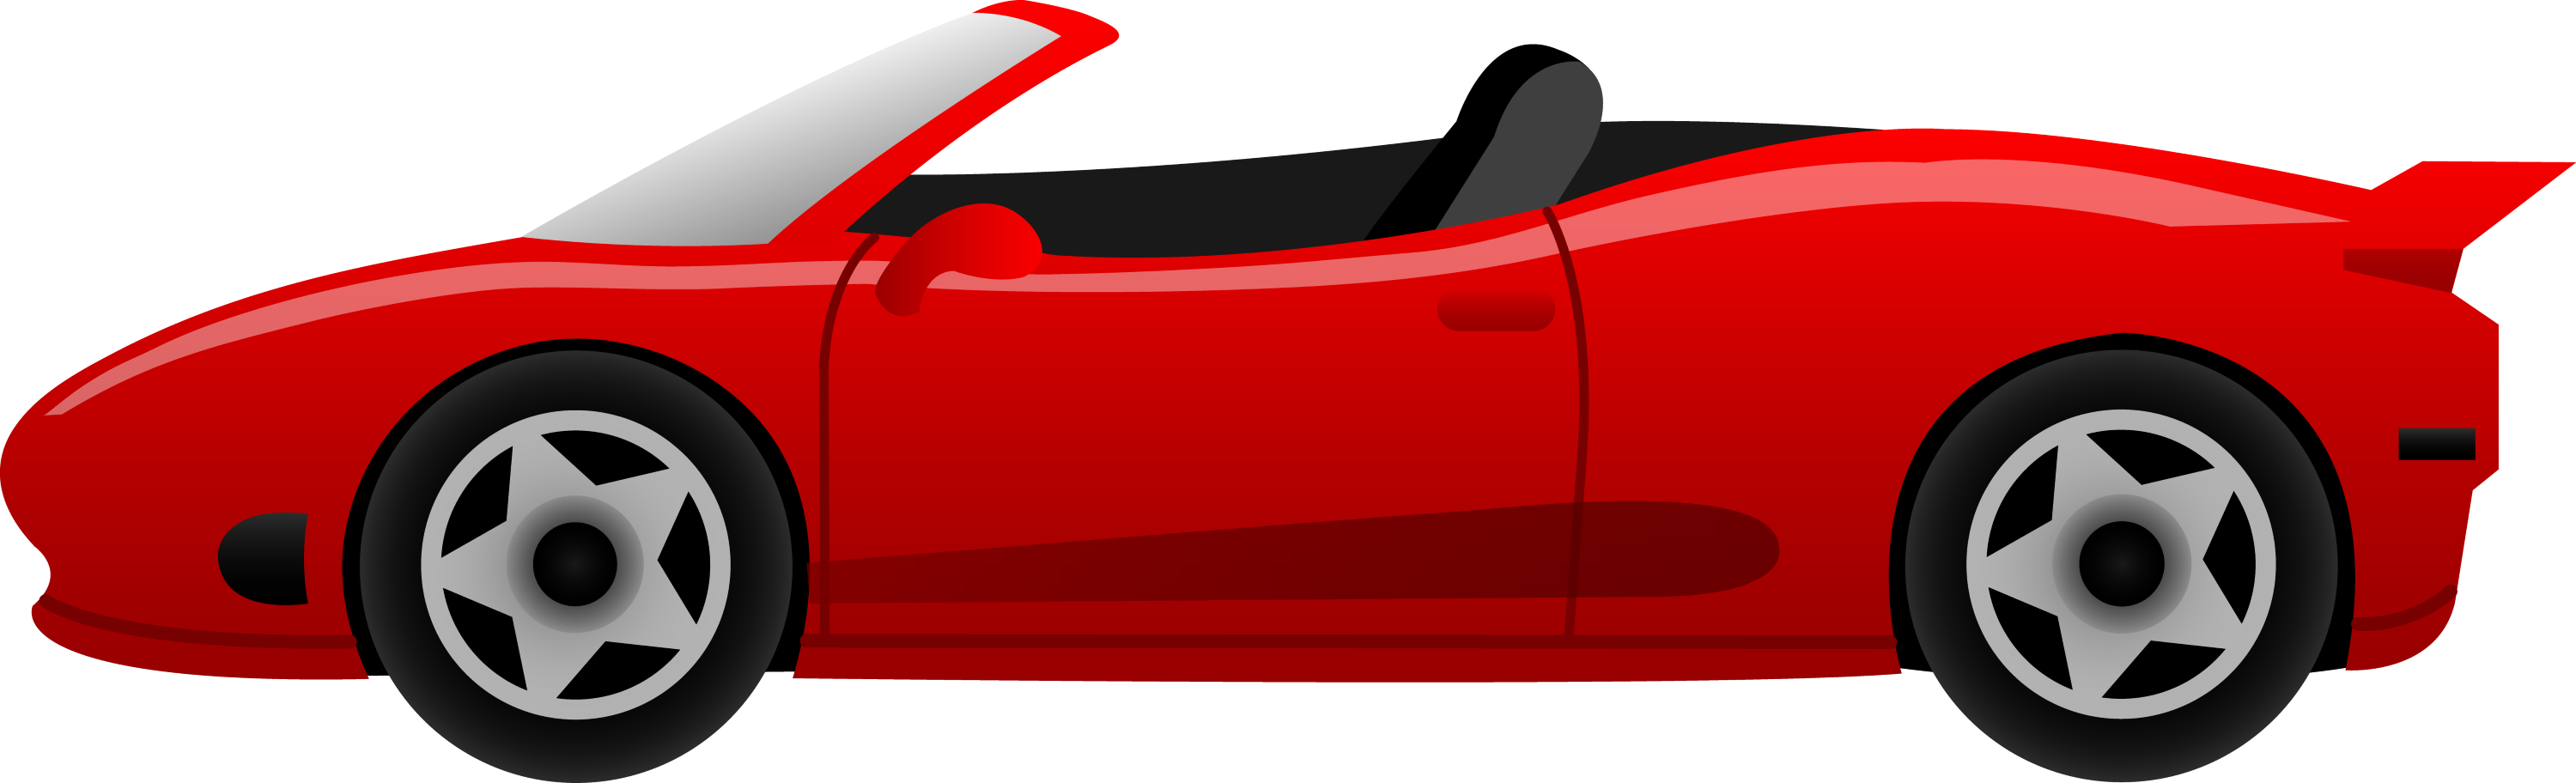 free clipart of sports cars - photo #13